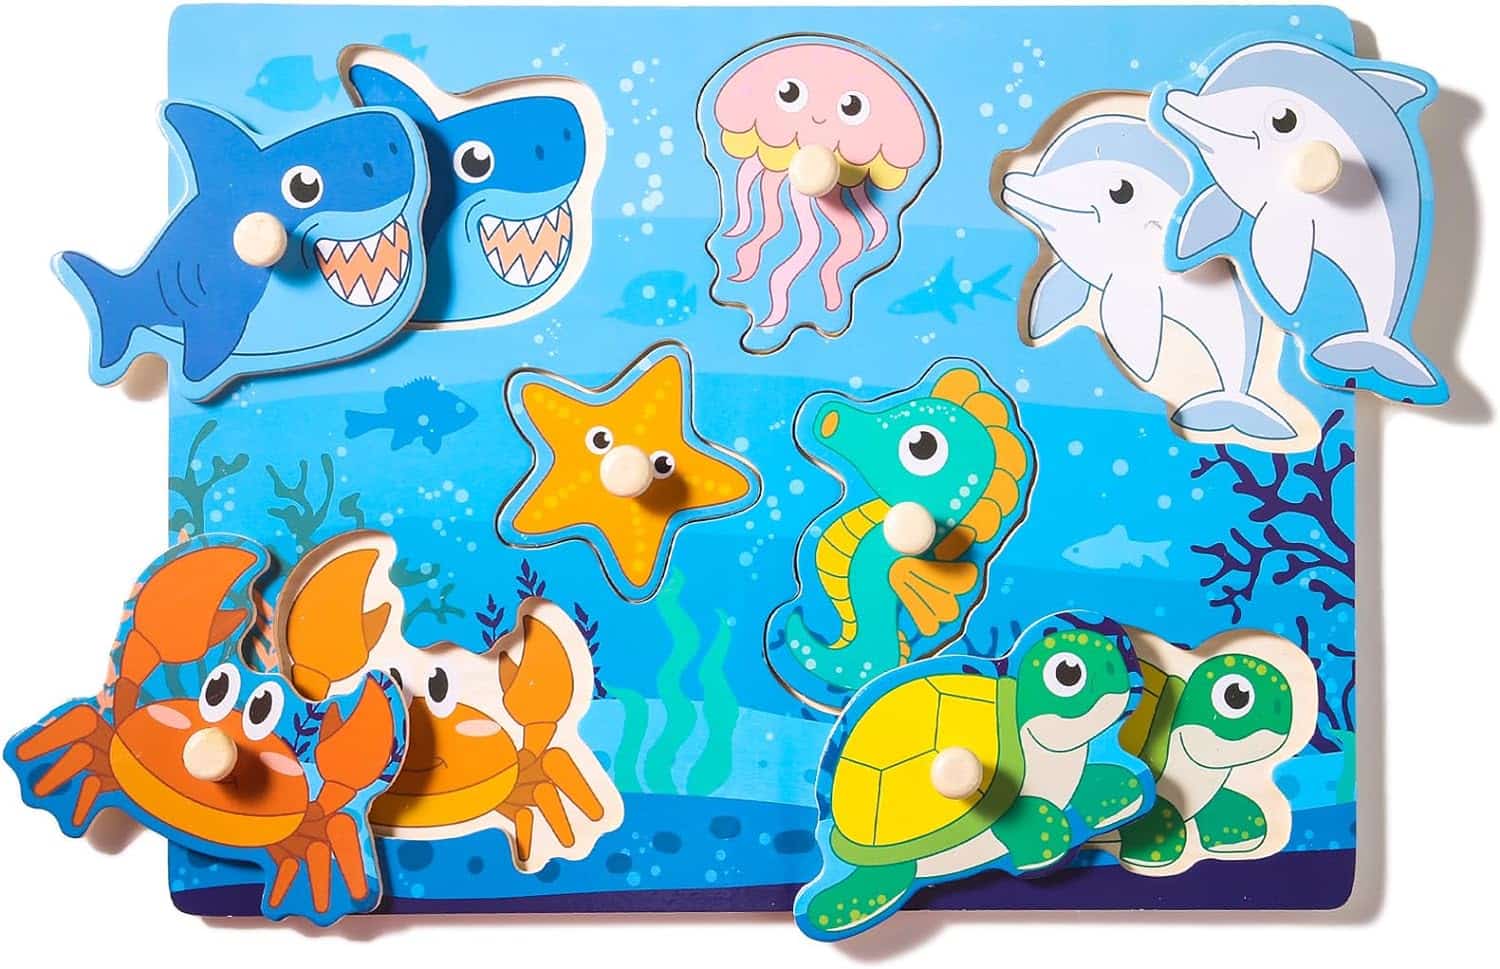 Wooden Puzzles for Toddlers 1-3, Ocean Animals Peg Puzzles for Kids, Learning Educational Puzzles for Baby Puzzles 12-18 Months, Montessori Toys（Ocean）